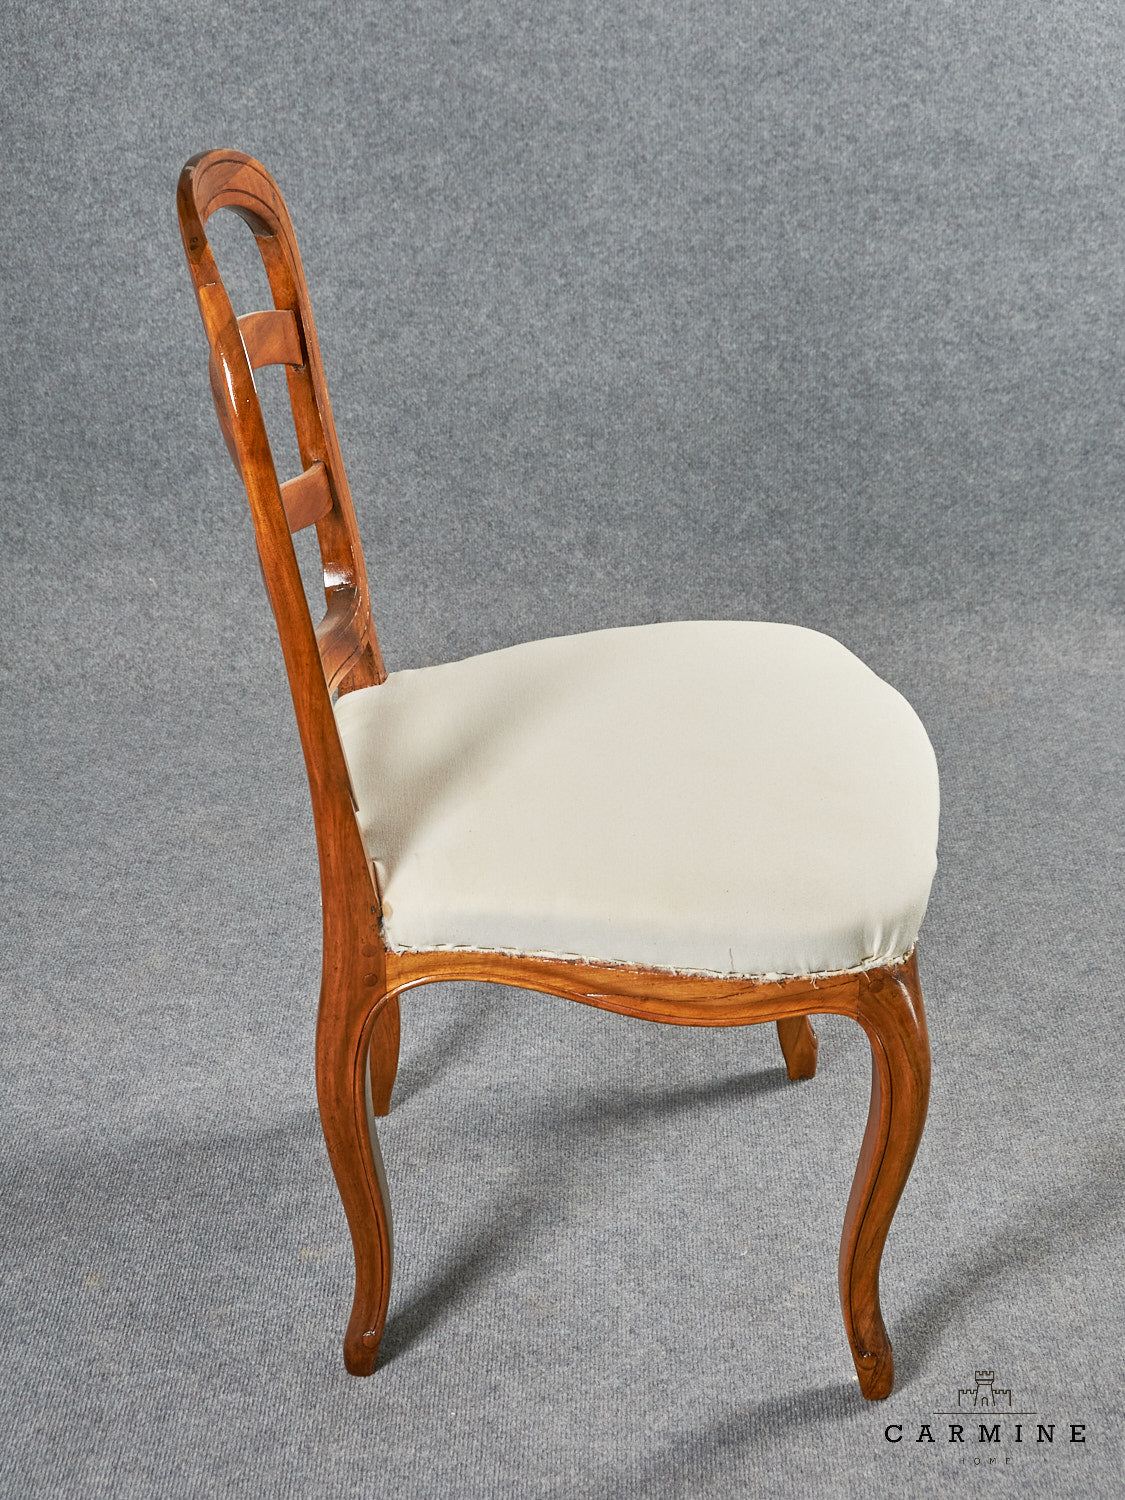 2 Bernese chairs, mid-18th century